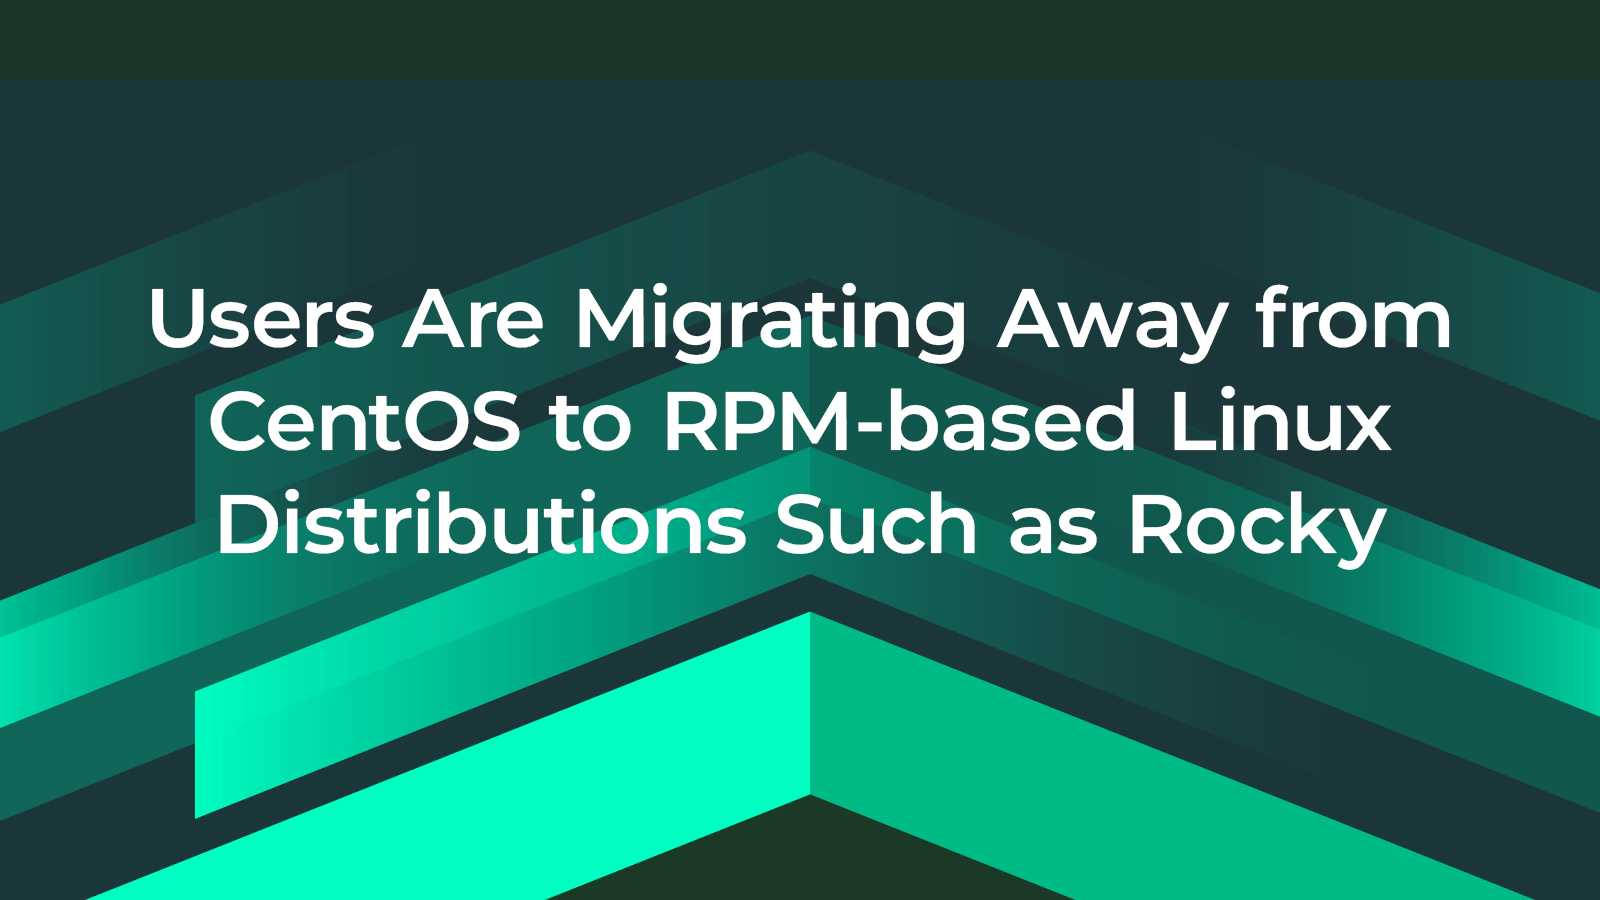 Steady Trend in CentOS Migrations to RPM-Based Distributions